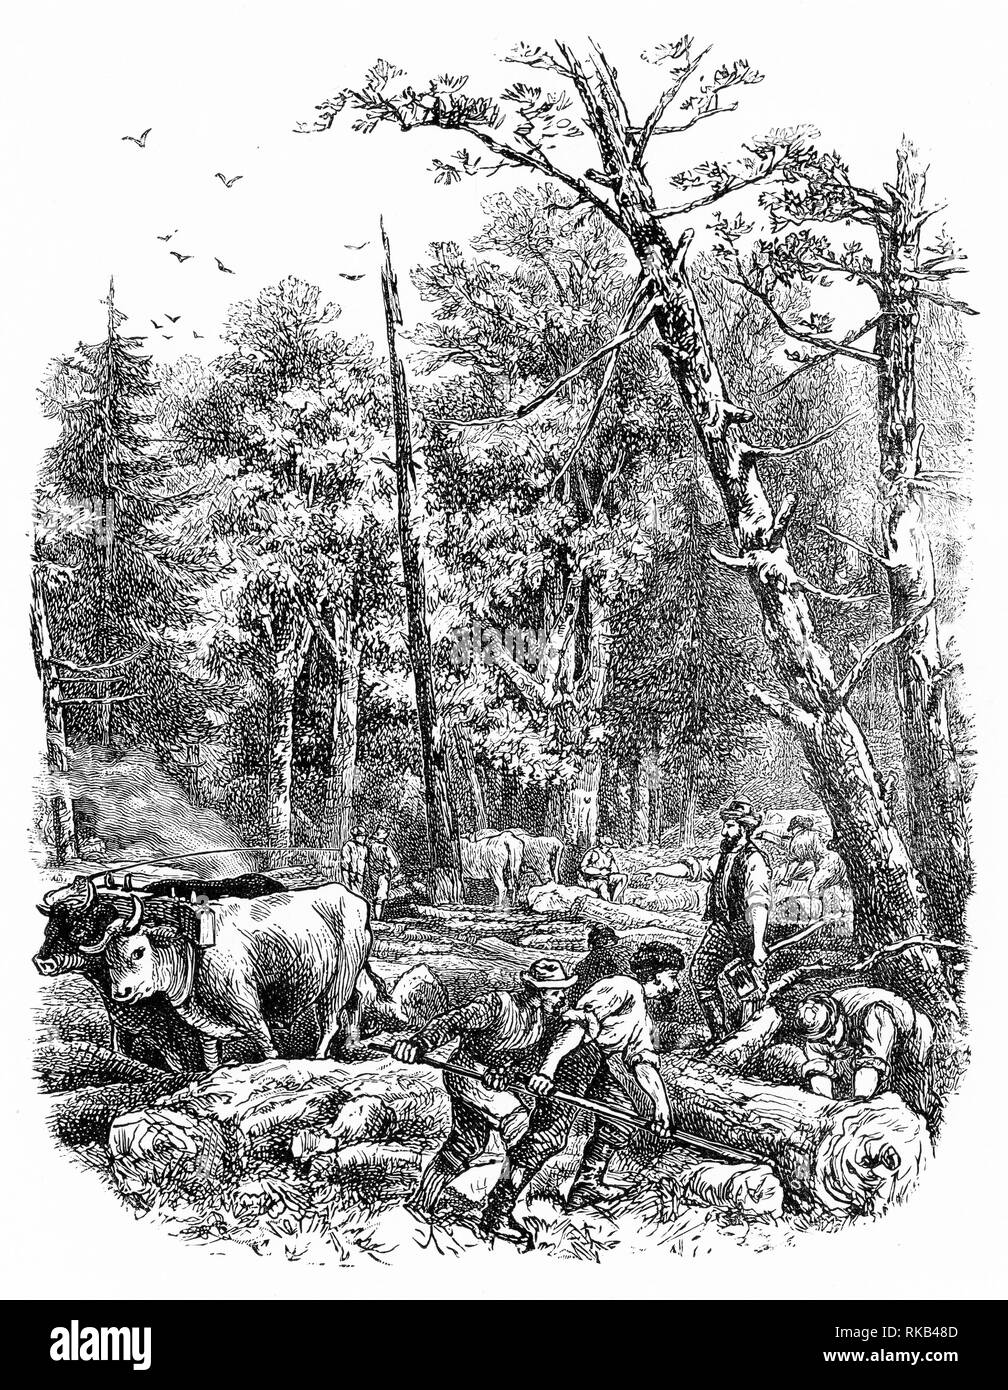 Engraving of lumberjacks working in the Canadian wilderness (or any wilderness for that matter) Stock Photo